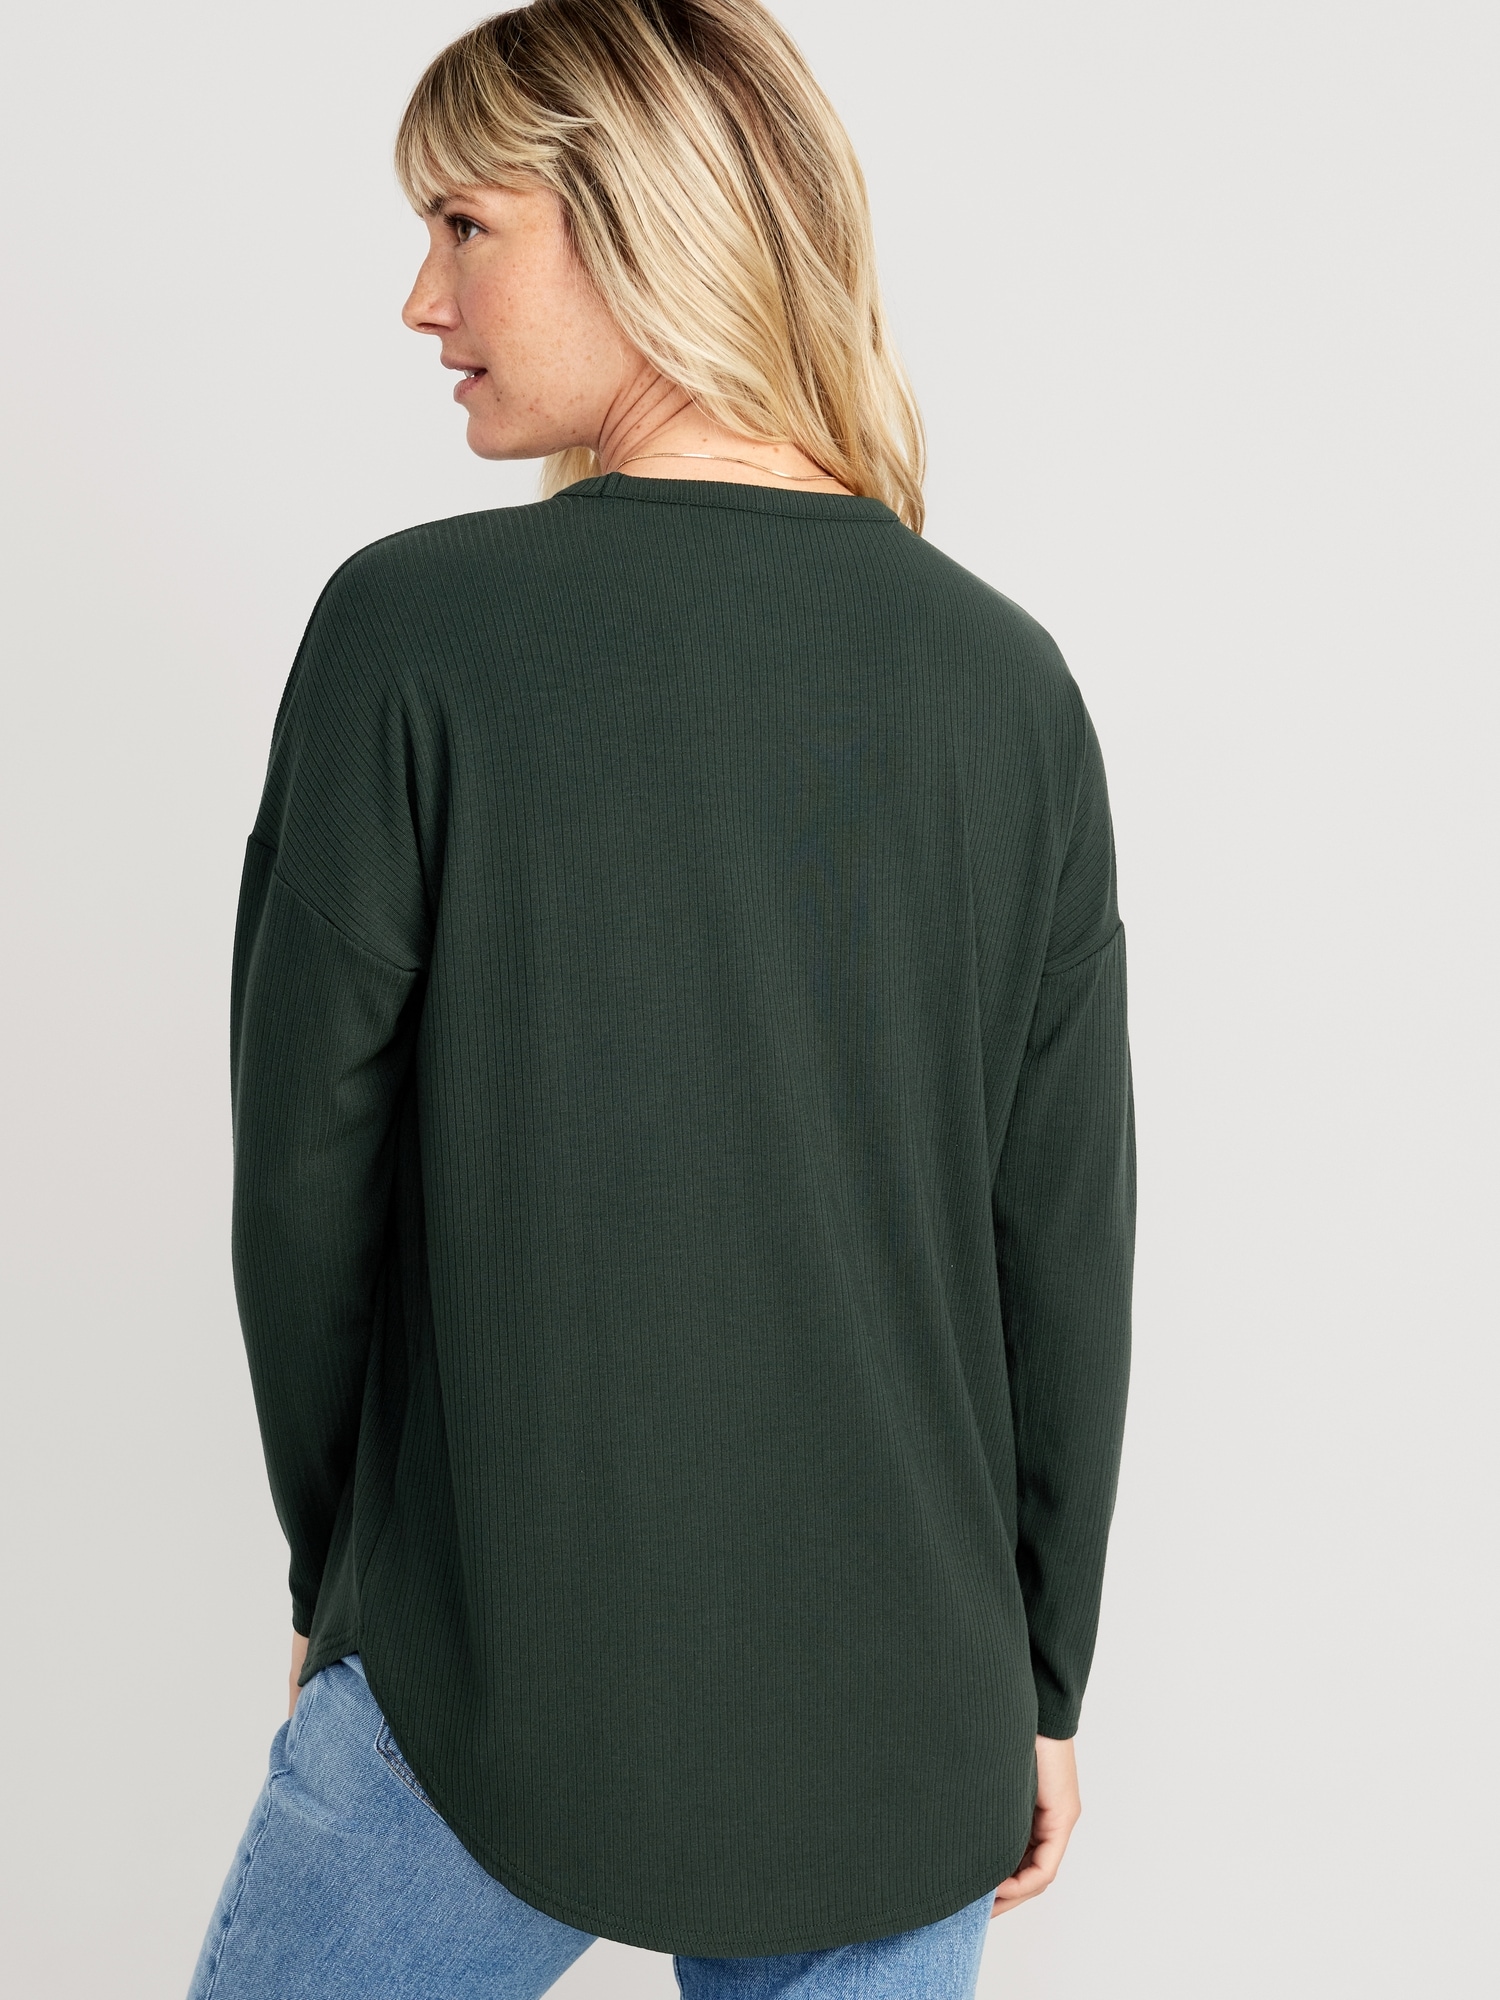 Navy for Luxe Women Rib-Knit Old Tunic T-Shirt |